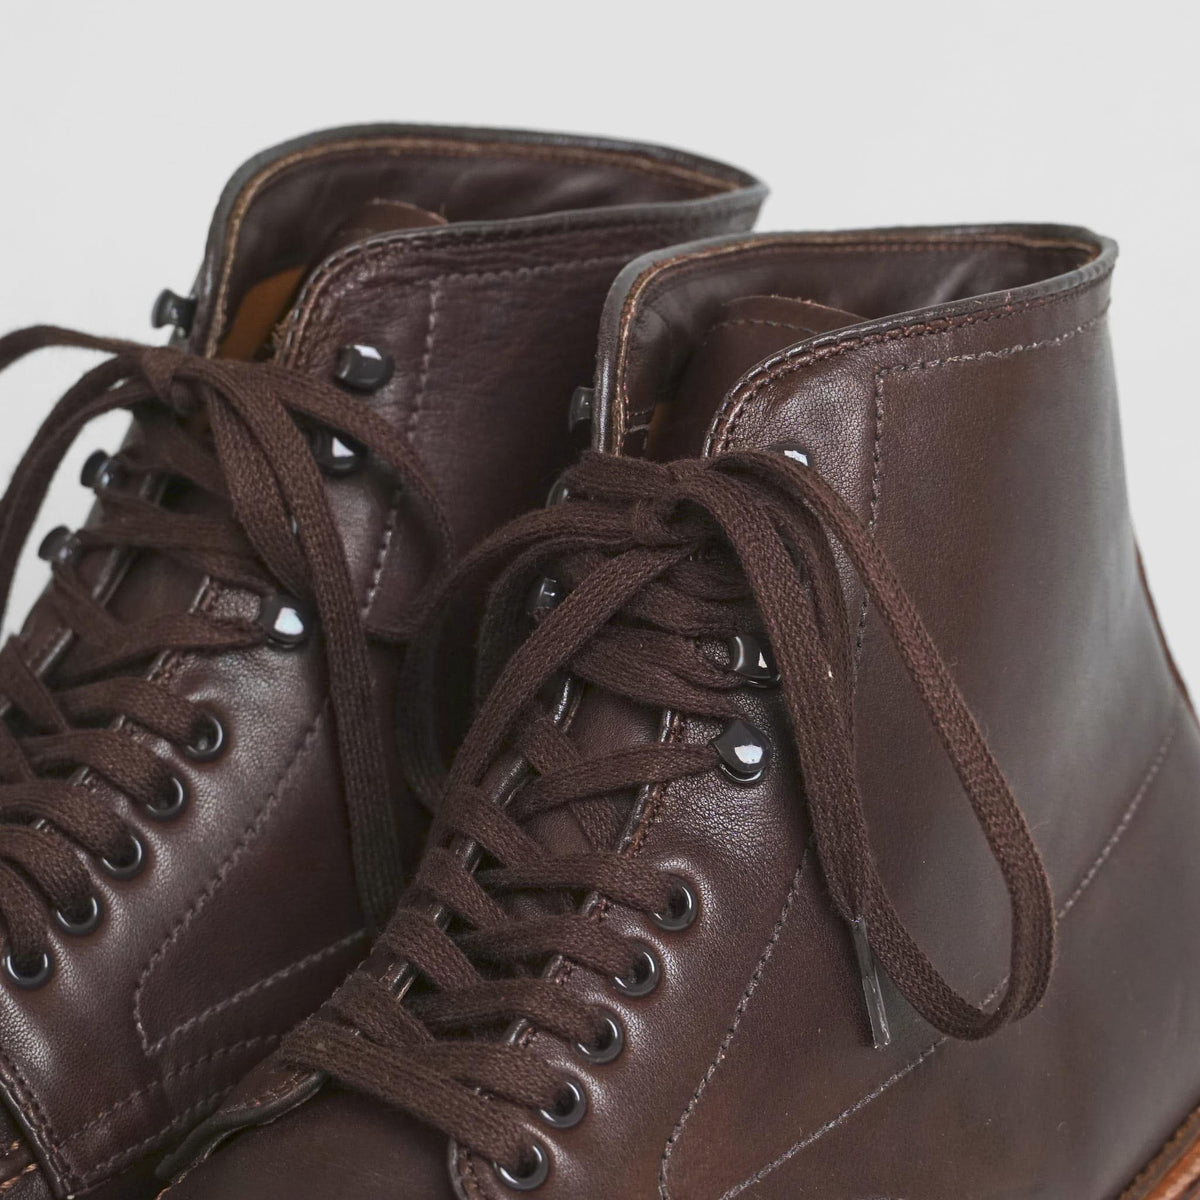 Alden Indy Boot with Commando Sole